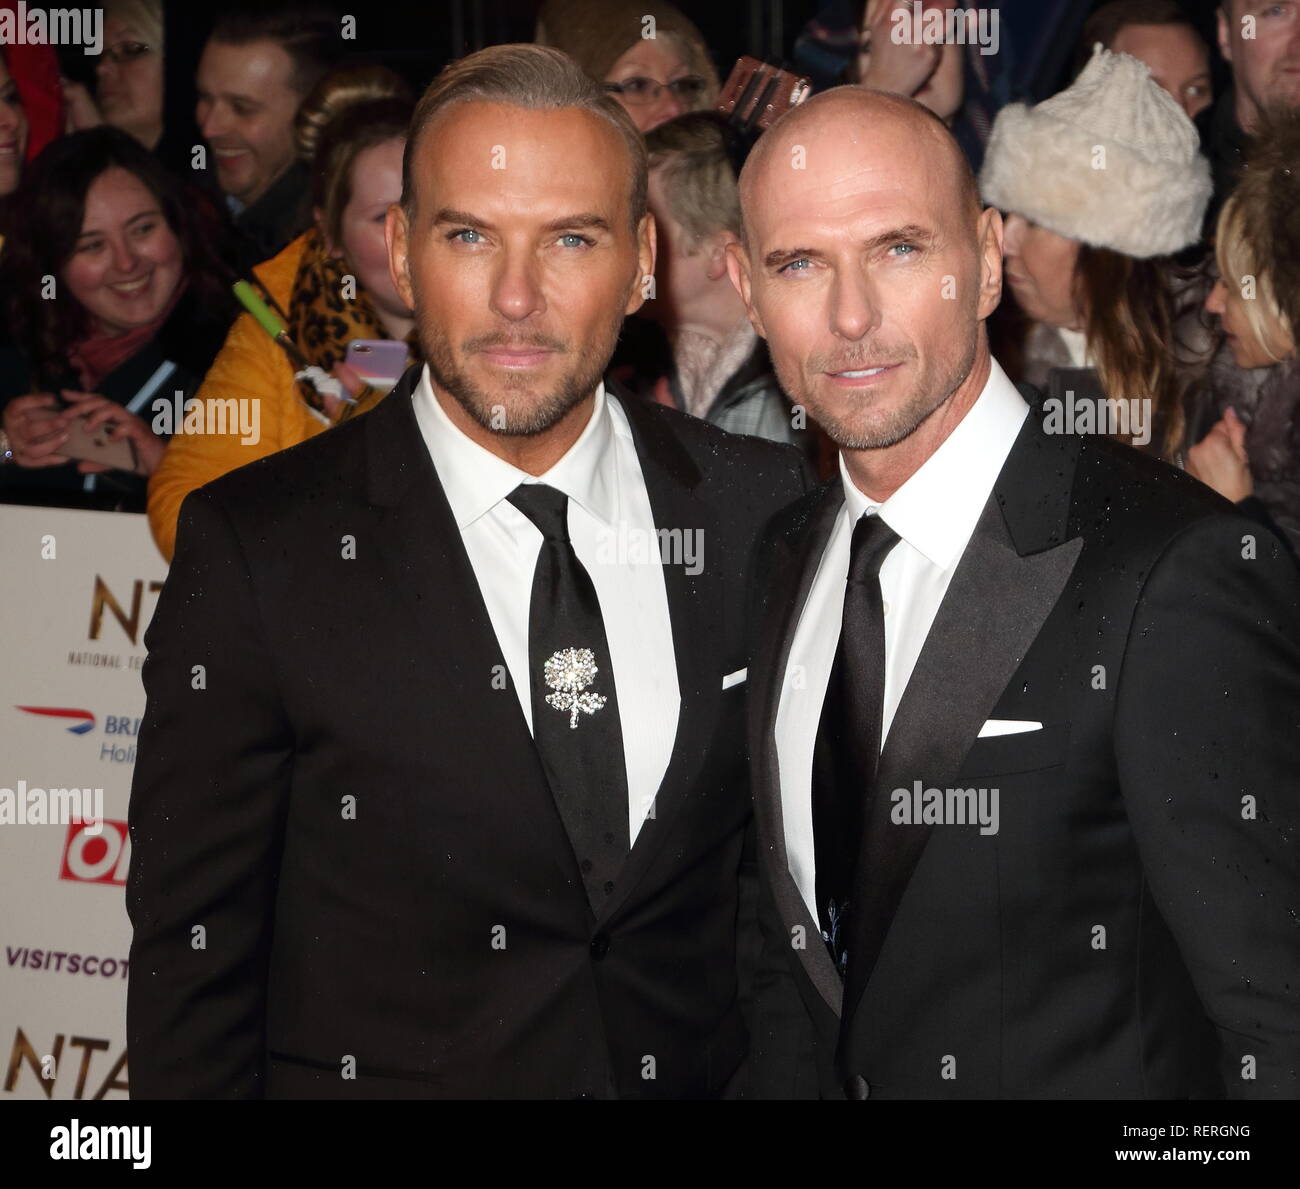 Matt and Luke Goss - aka Bros- are  seen on the red carpet during the National Television Awards at the O2, Peninsula Square in London. Stock Photo